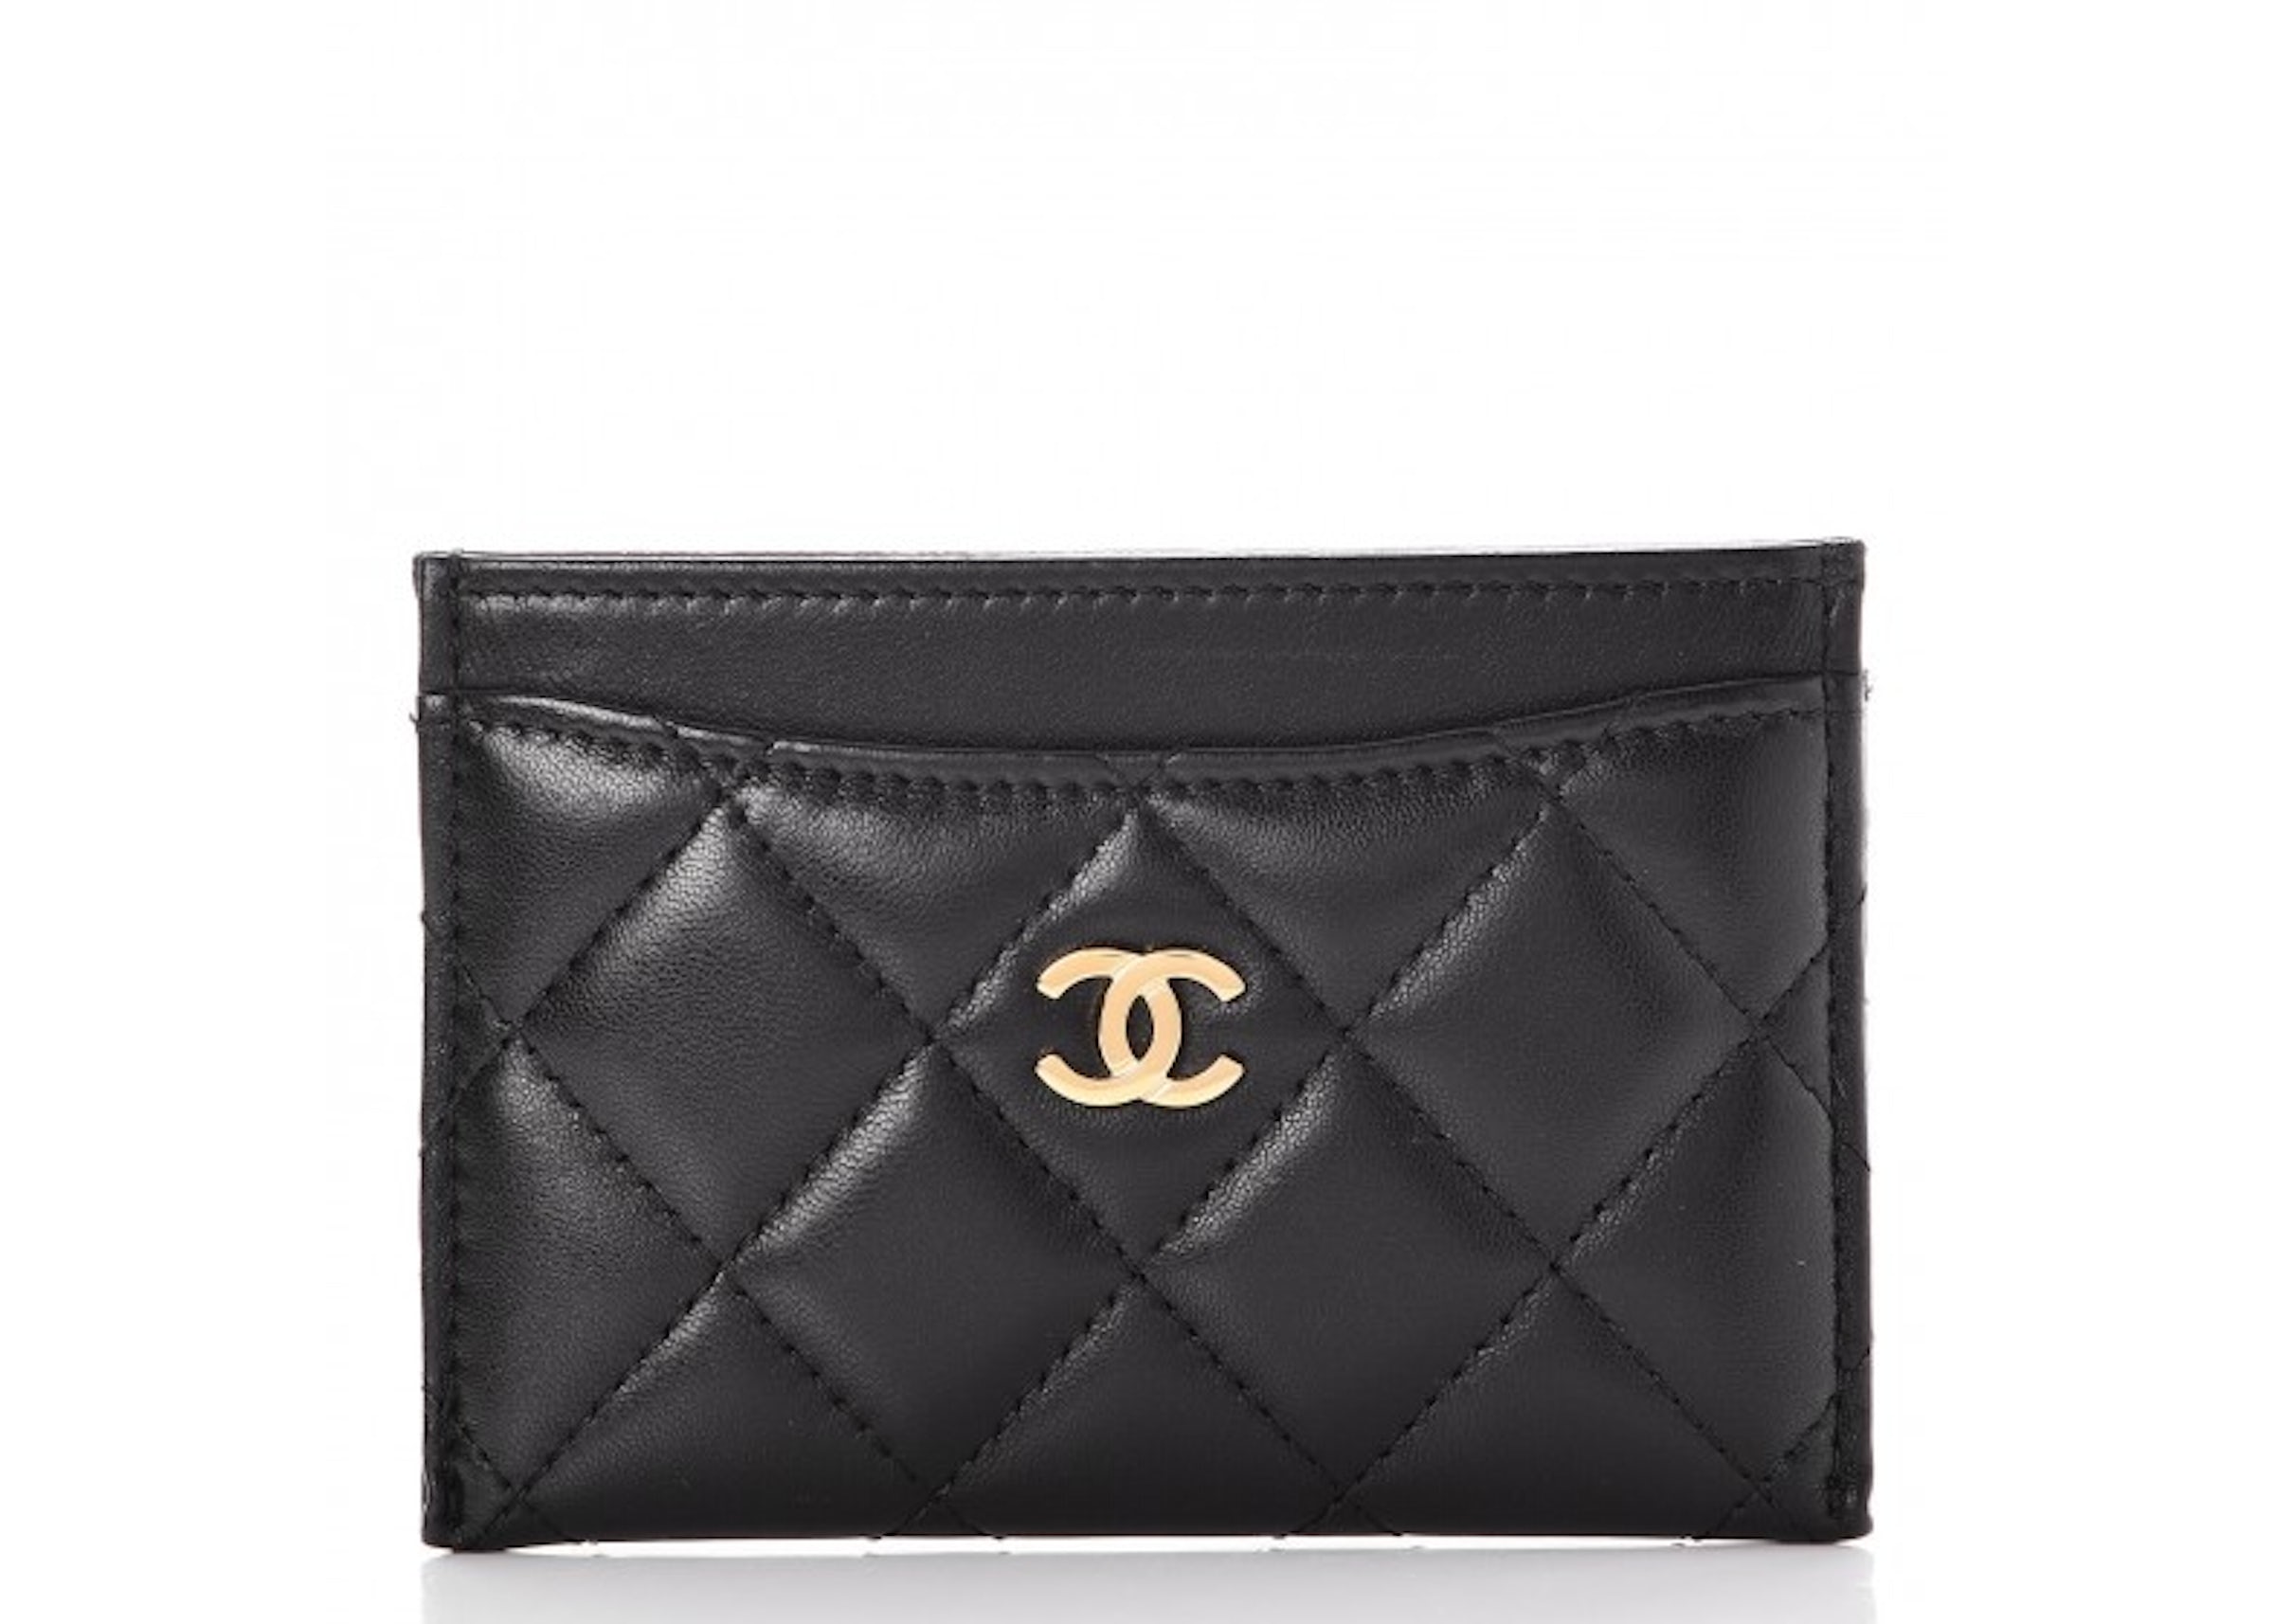 Buy Chanel Card Case Accessories - StockX